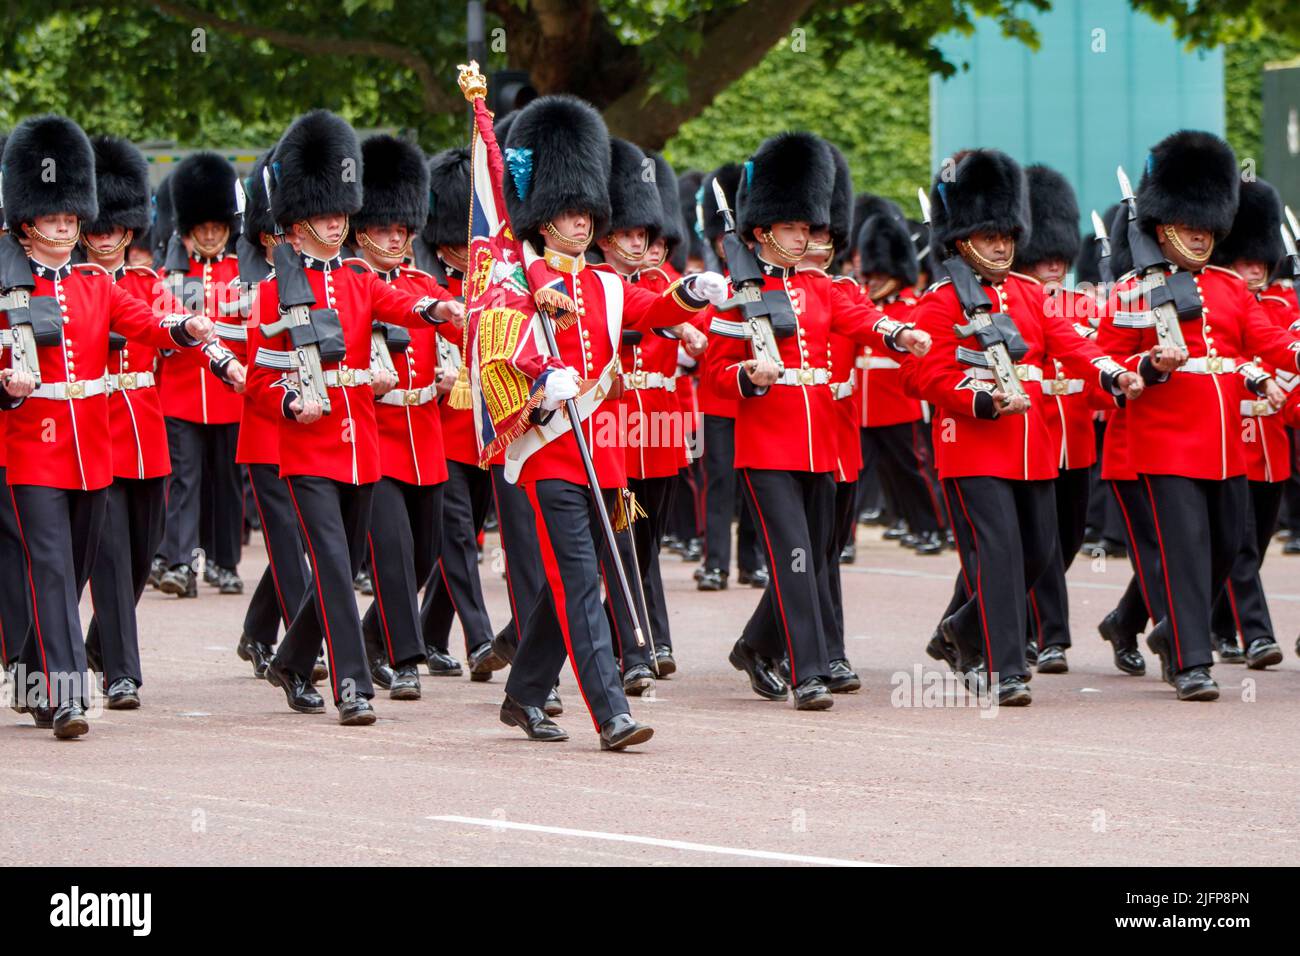 Teniente Charles Bashall, Ensign de The Irish Colours at Trooping the Colour, Colonel’s Review in the Mall, Londres, Inglaterra, Reino Unido Foto de stock